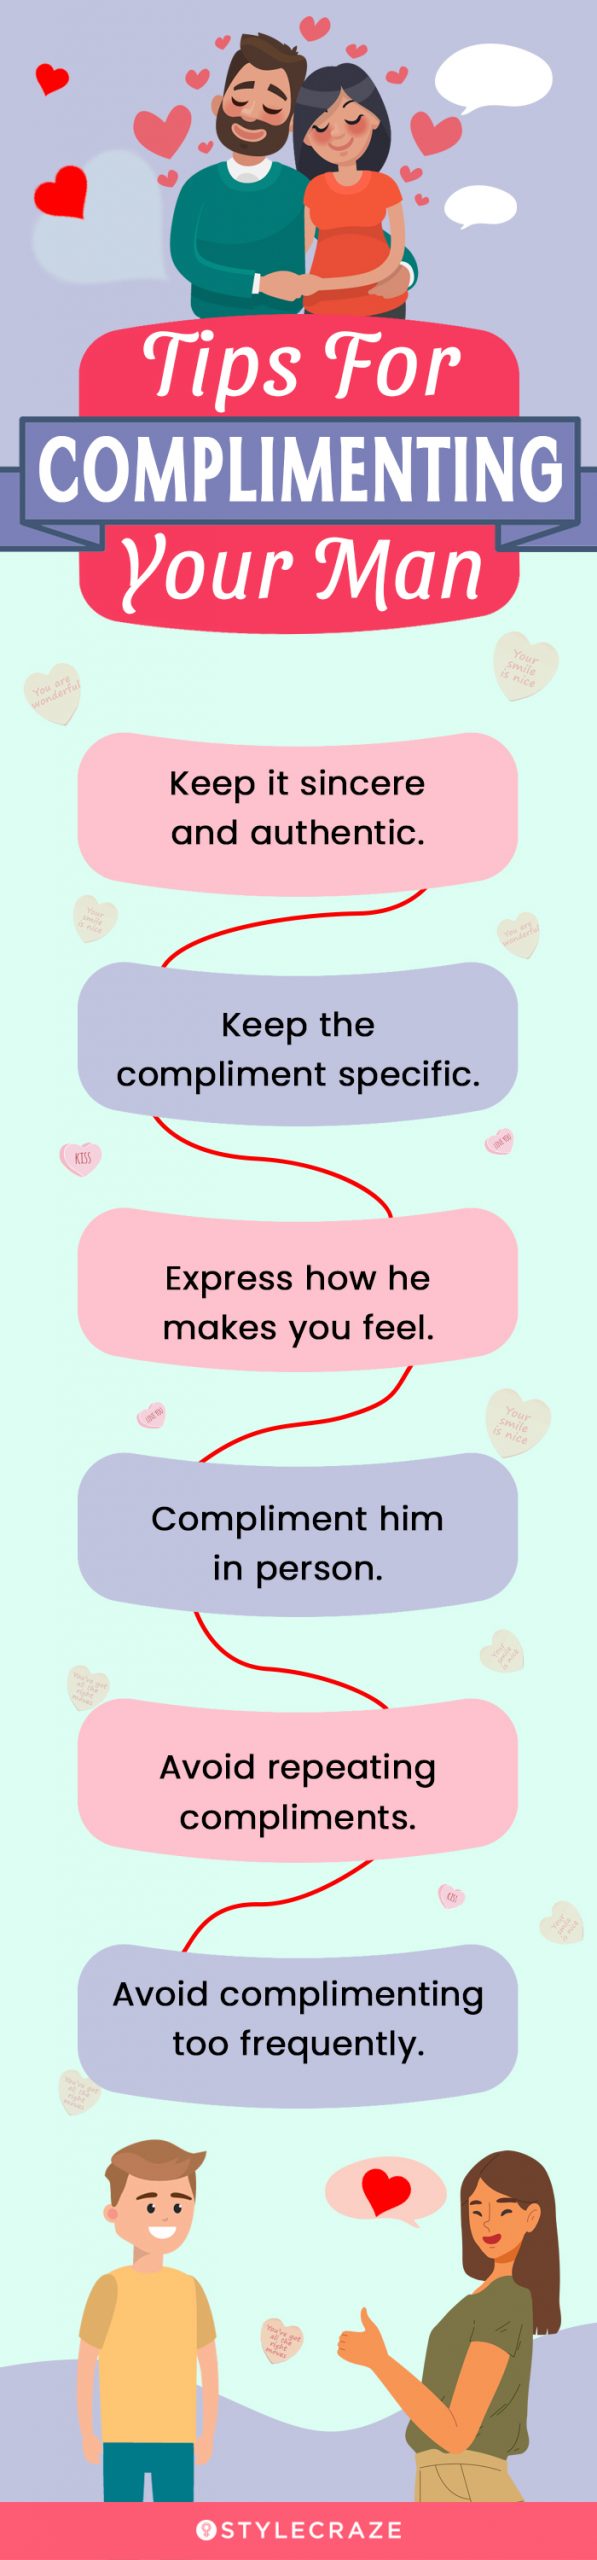 tips for complimenting your man [infographic]